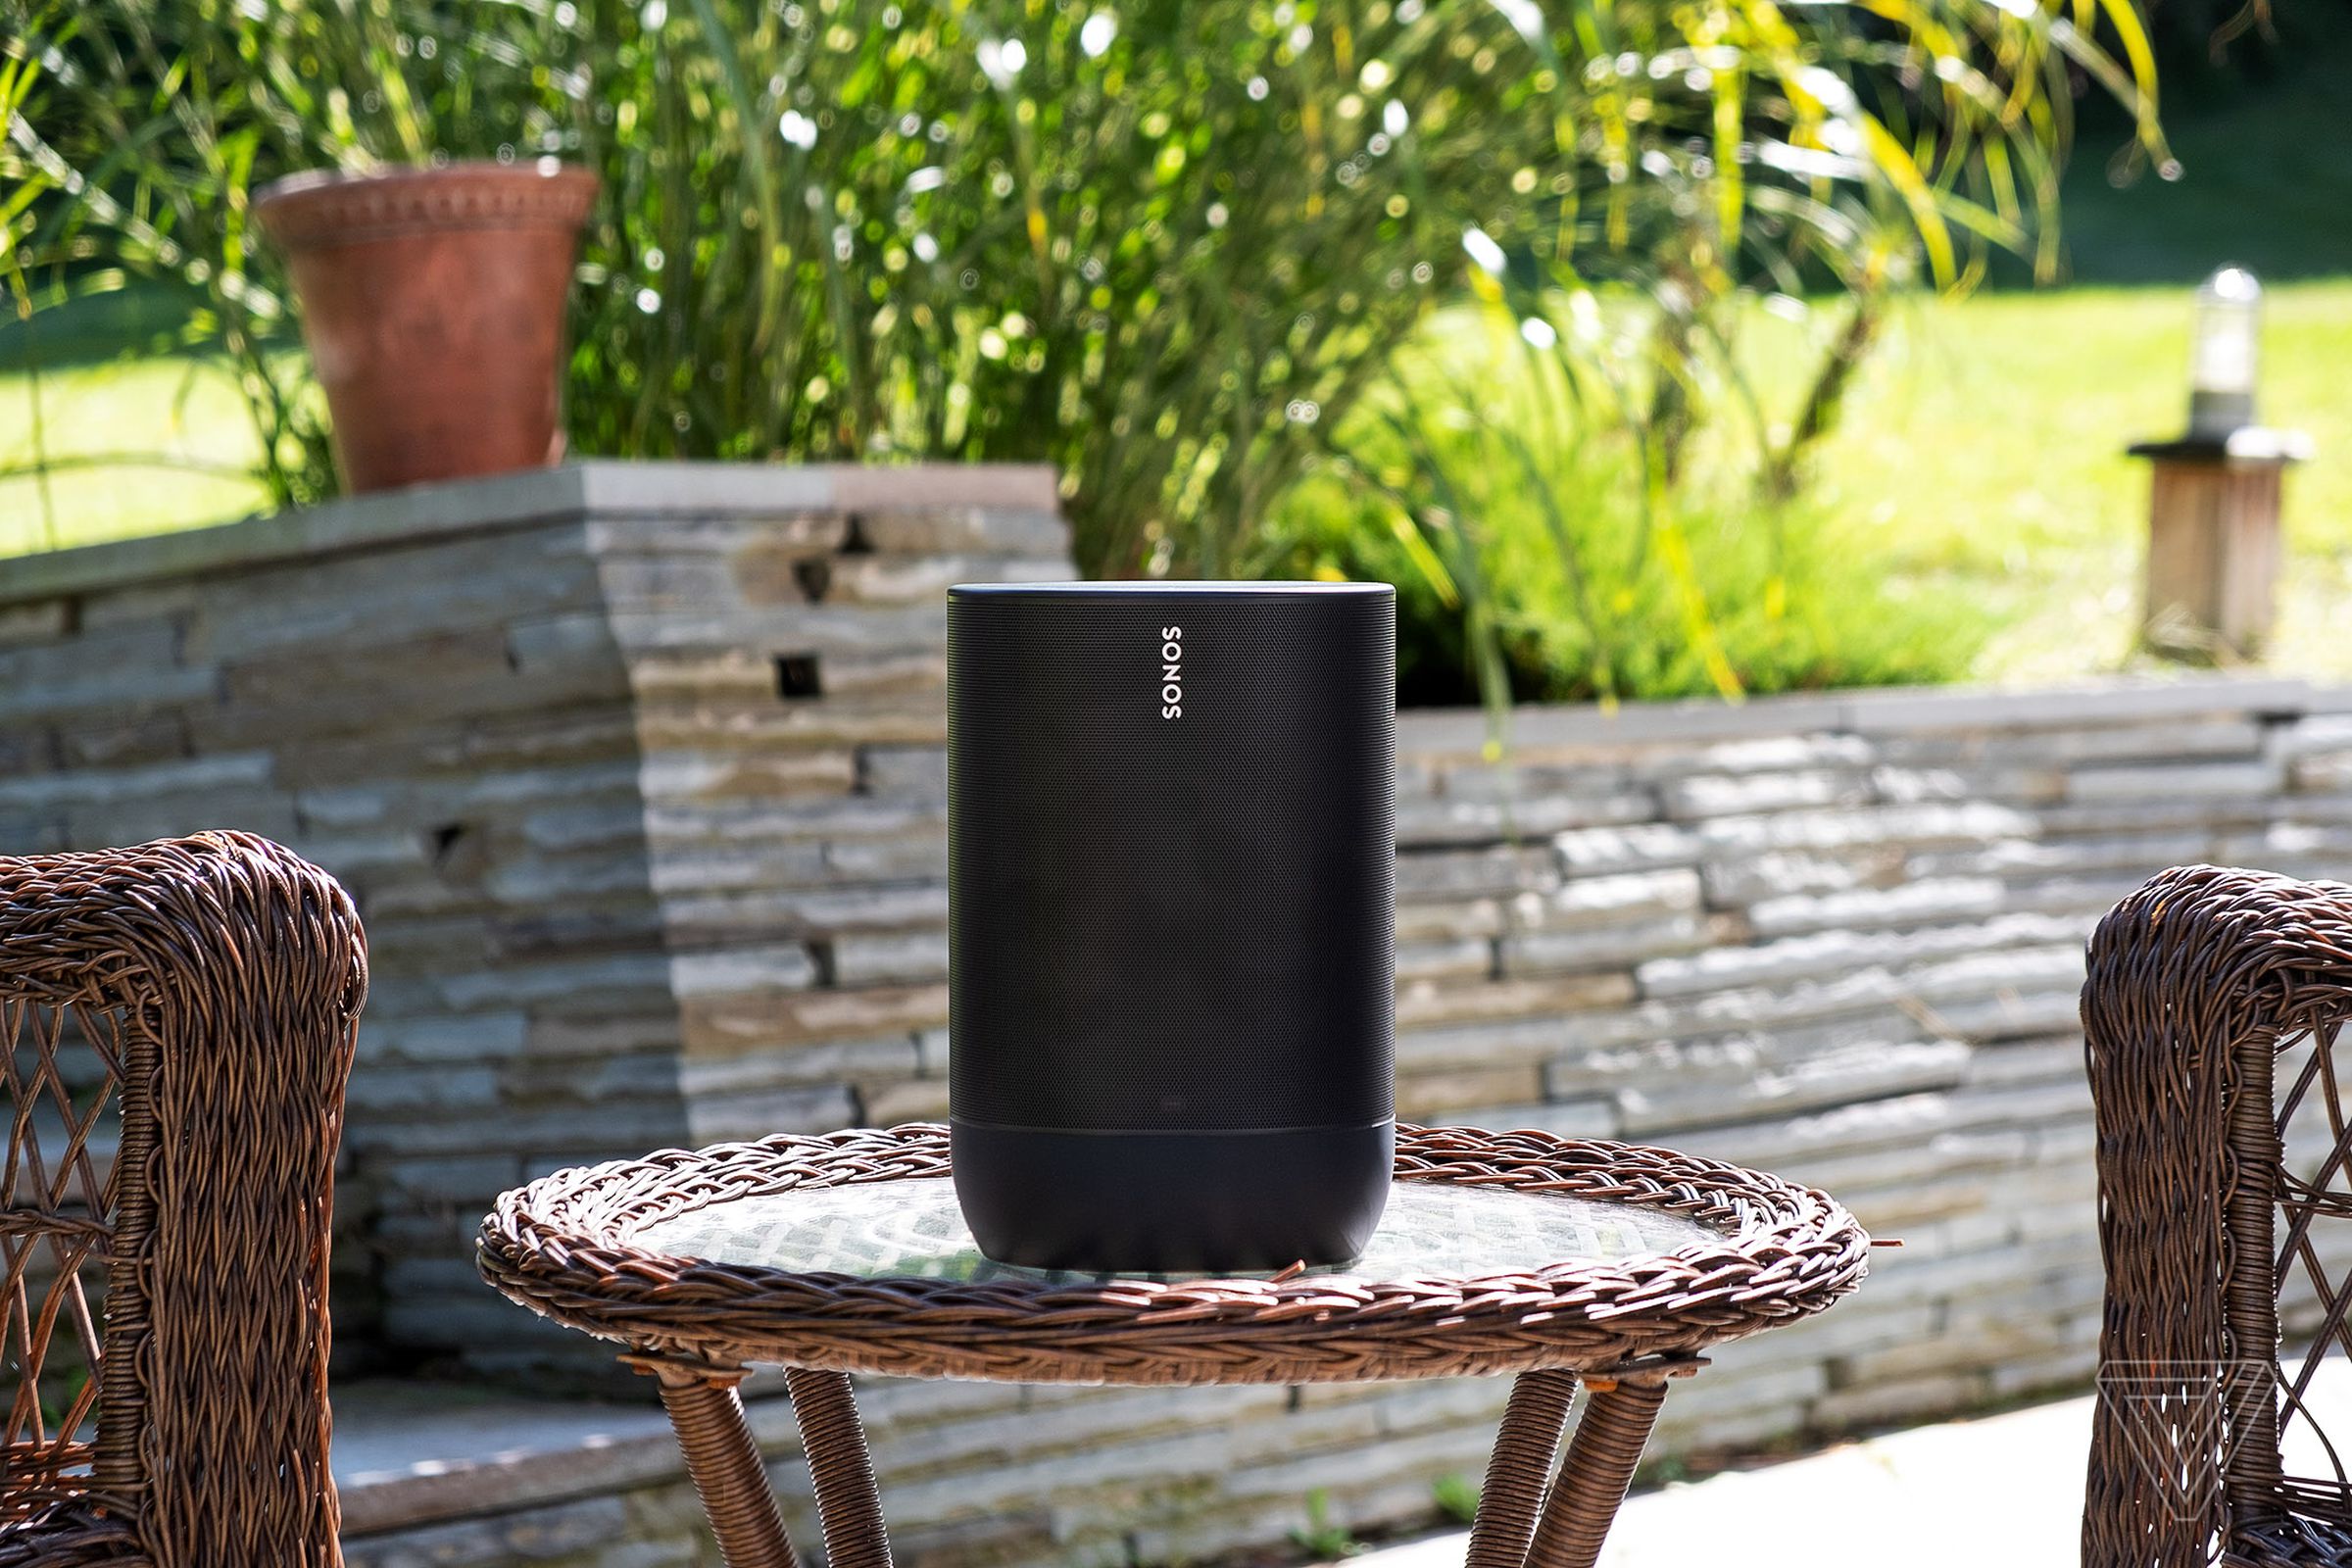 A photo of the Sonos Move speaker on a backyard patio.